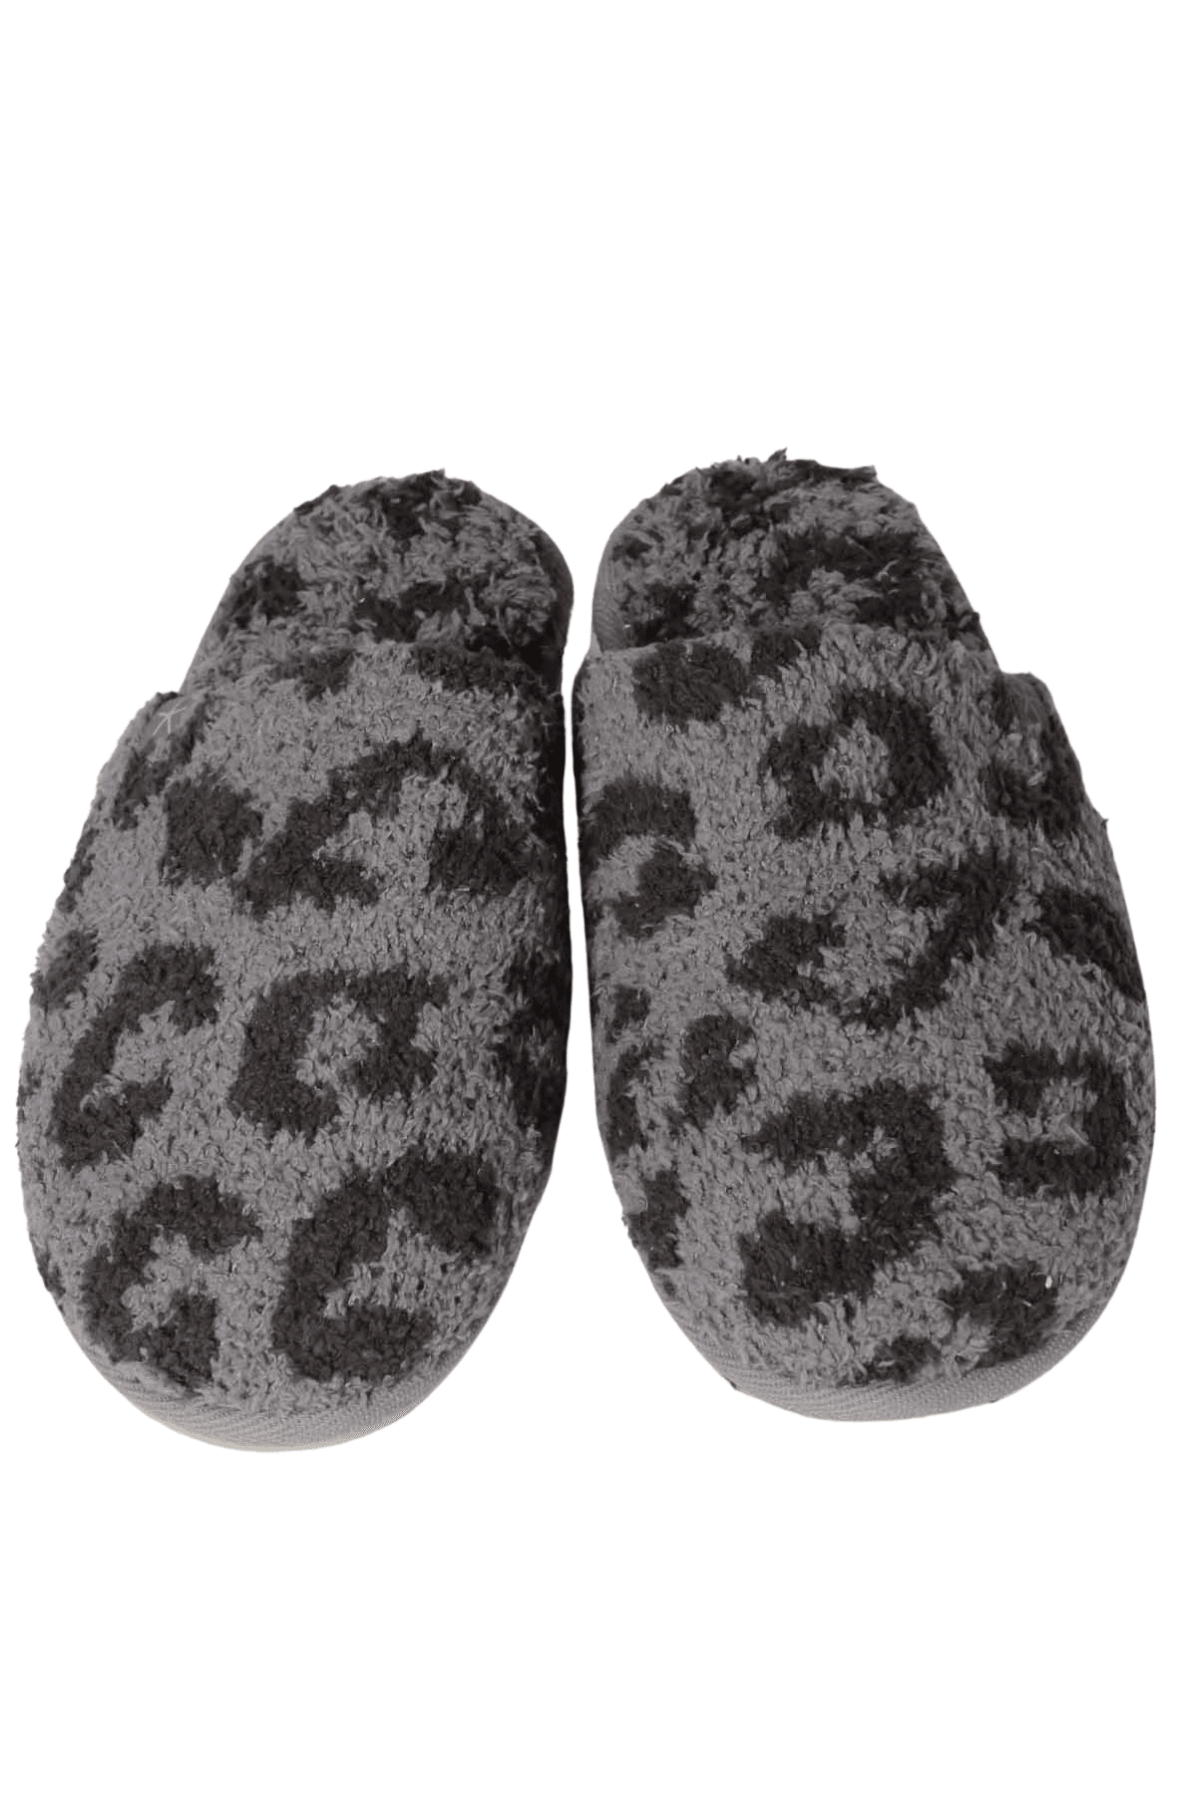 Black/Grey CozyChic Barefoot Into The Wild Slipper by Barefoot Dreams